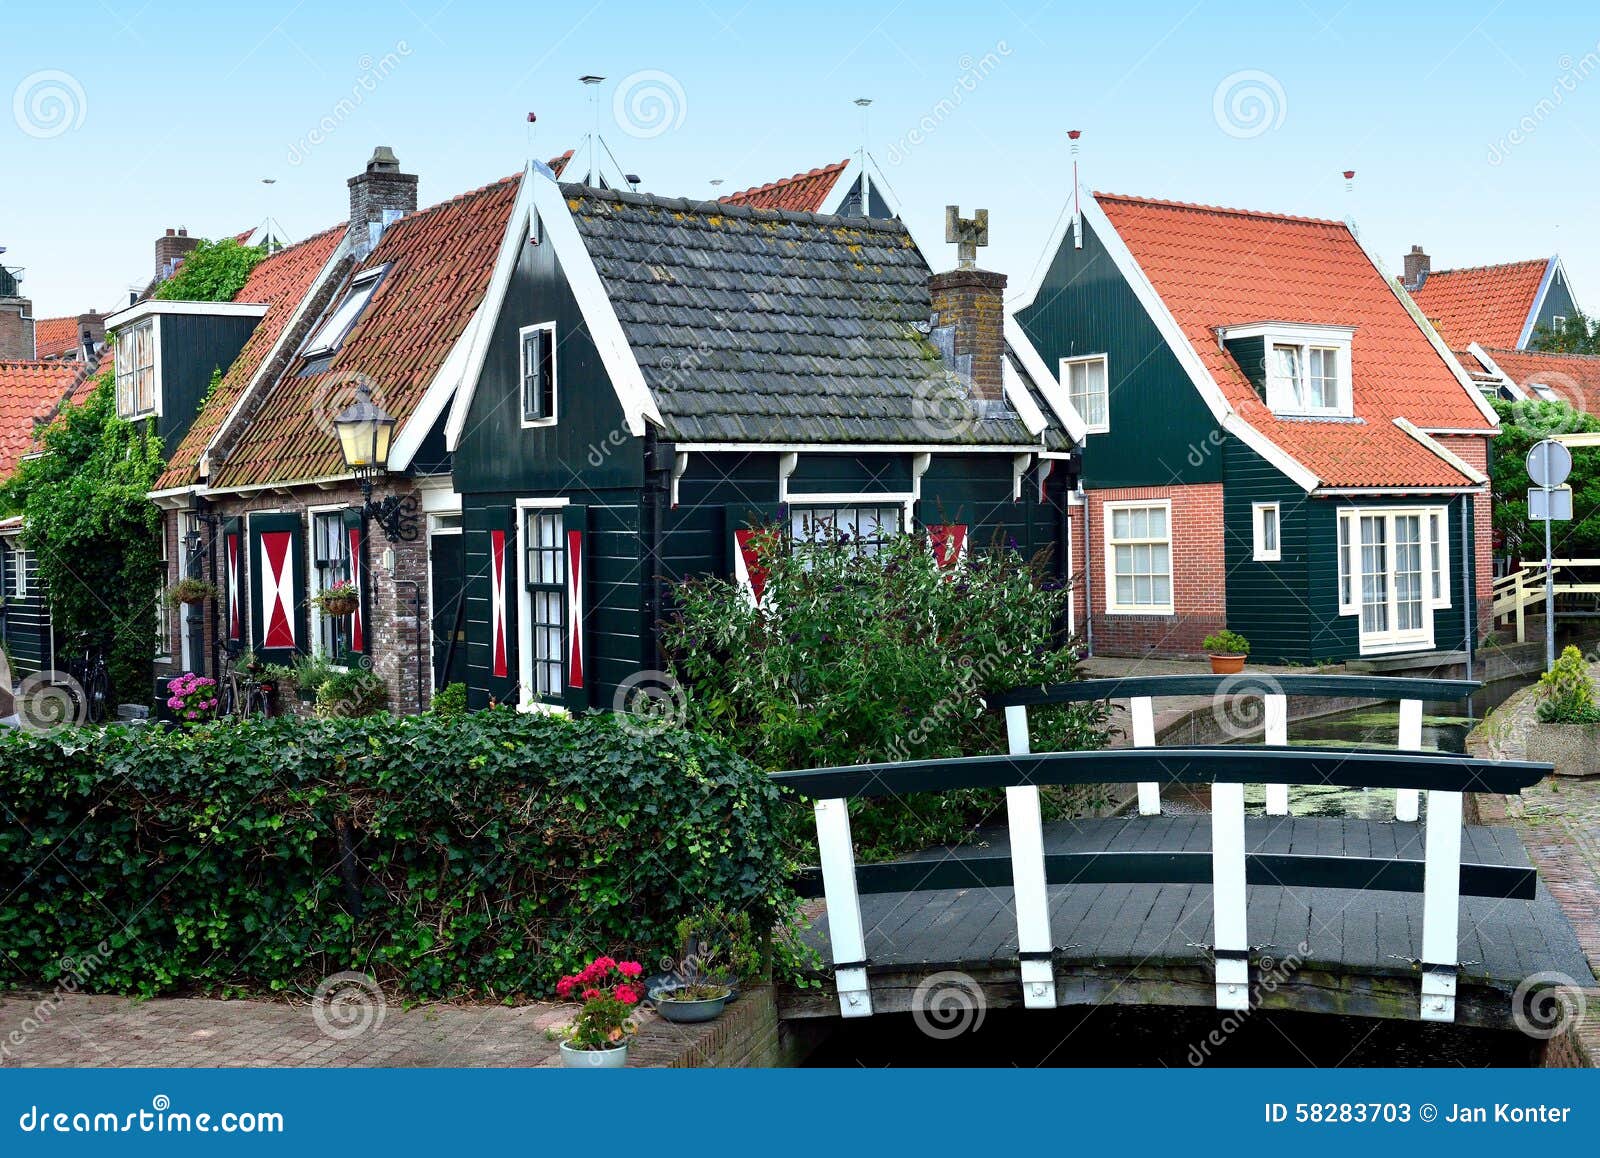 typical small houses and bridge in volendam, holland